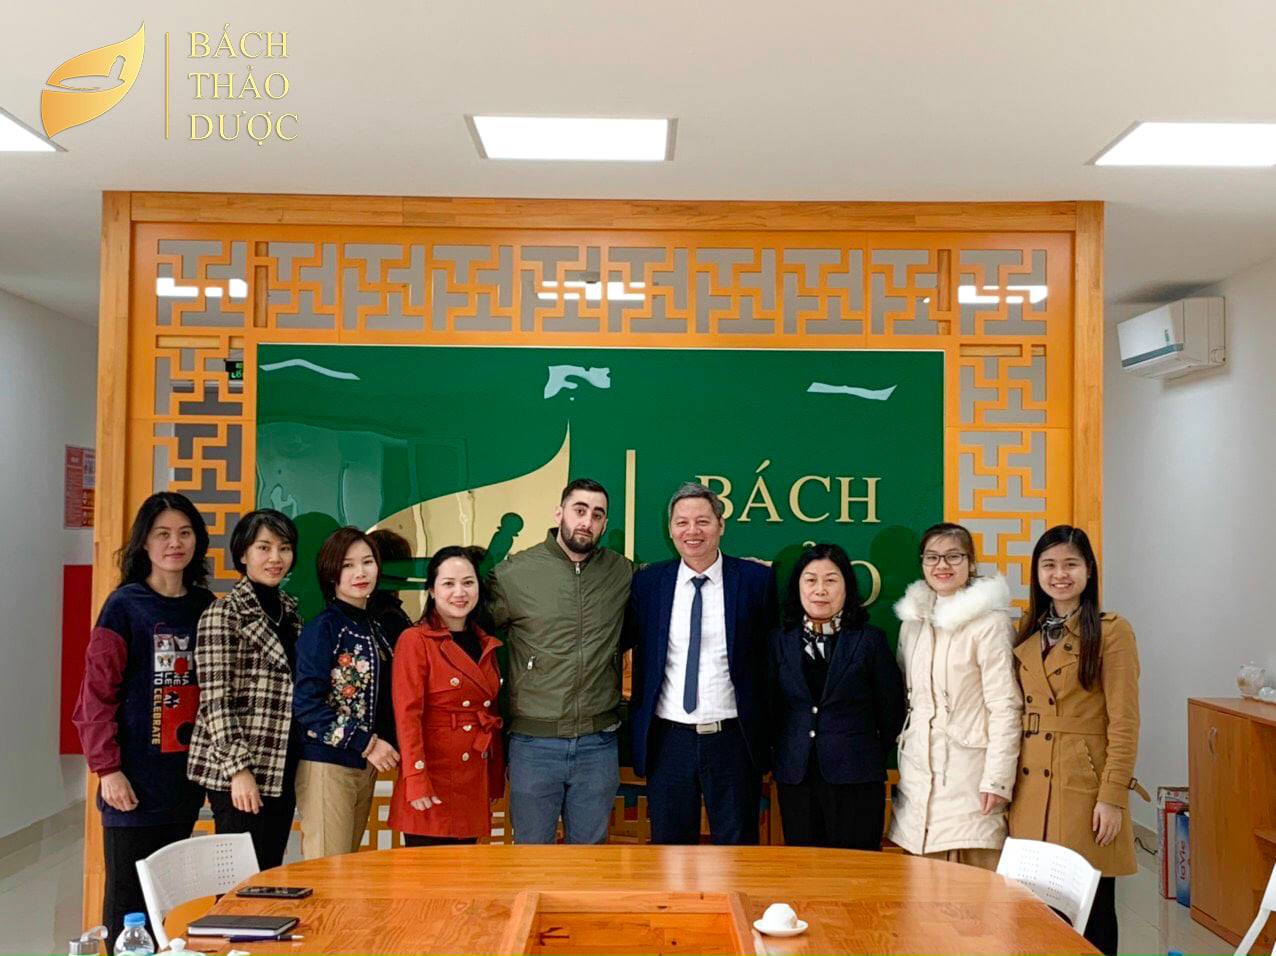 Bach Thao Duoc cooperates with the foreign partner to bring products to international markets